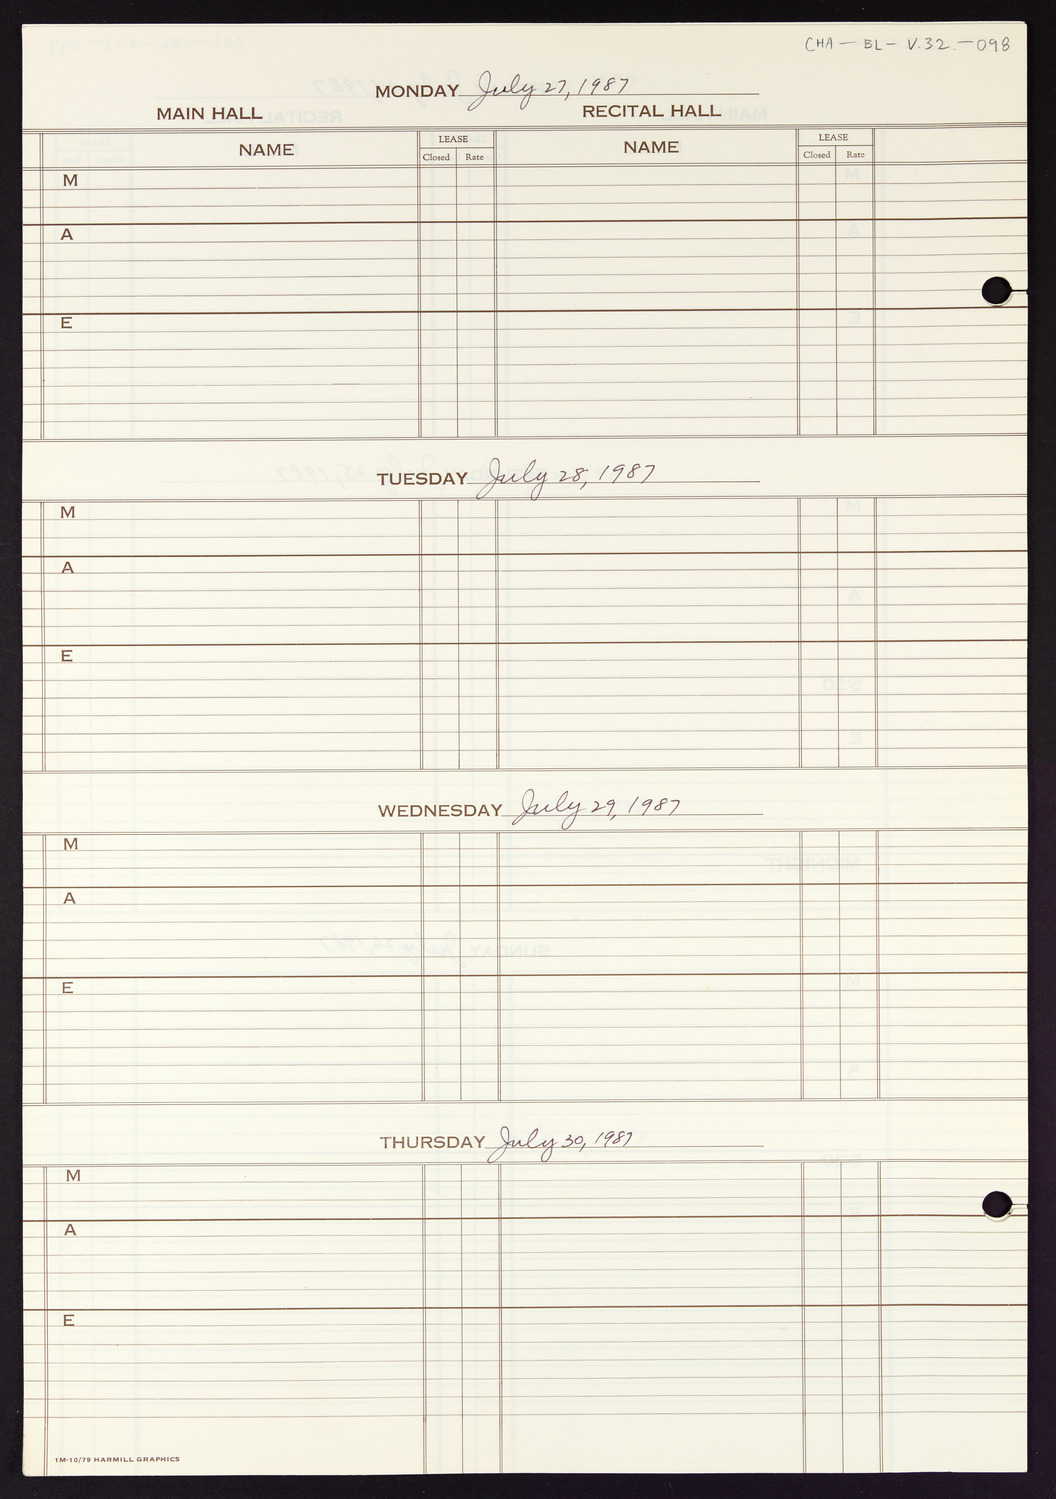 Carnegie Hall Booking Ledger, volume 32, page 98